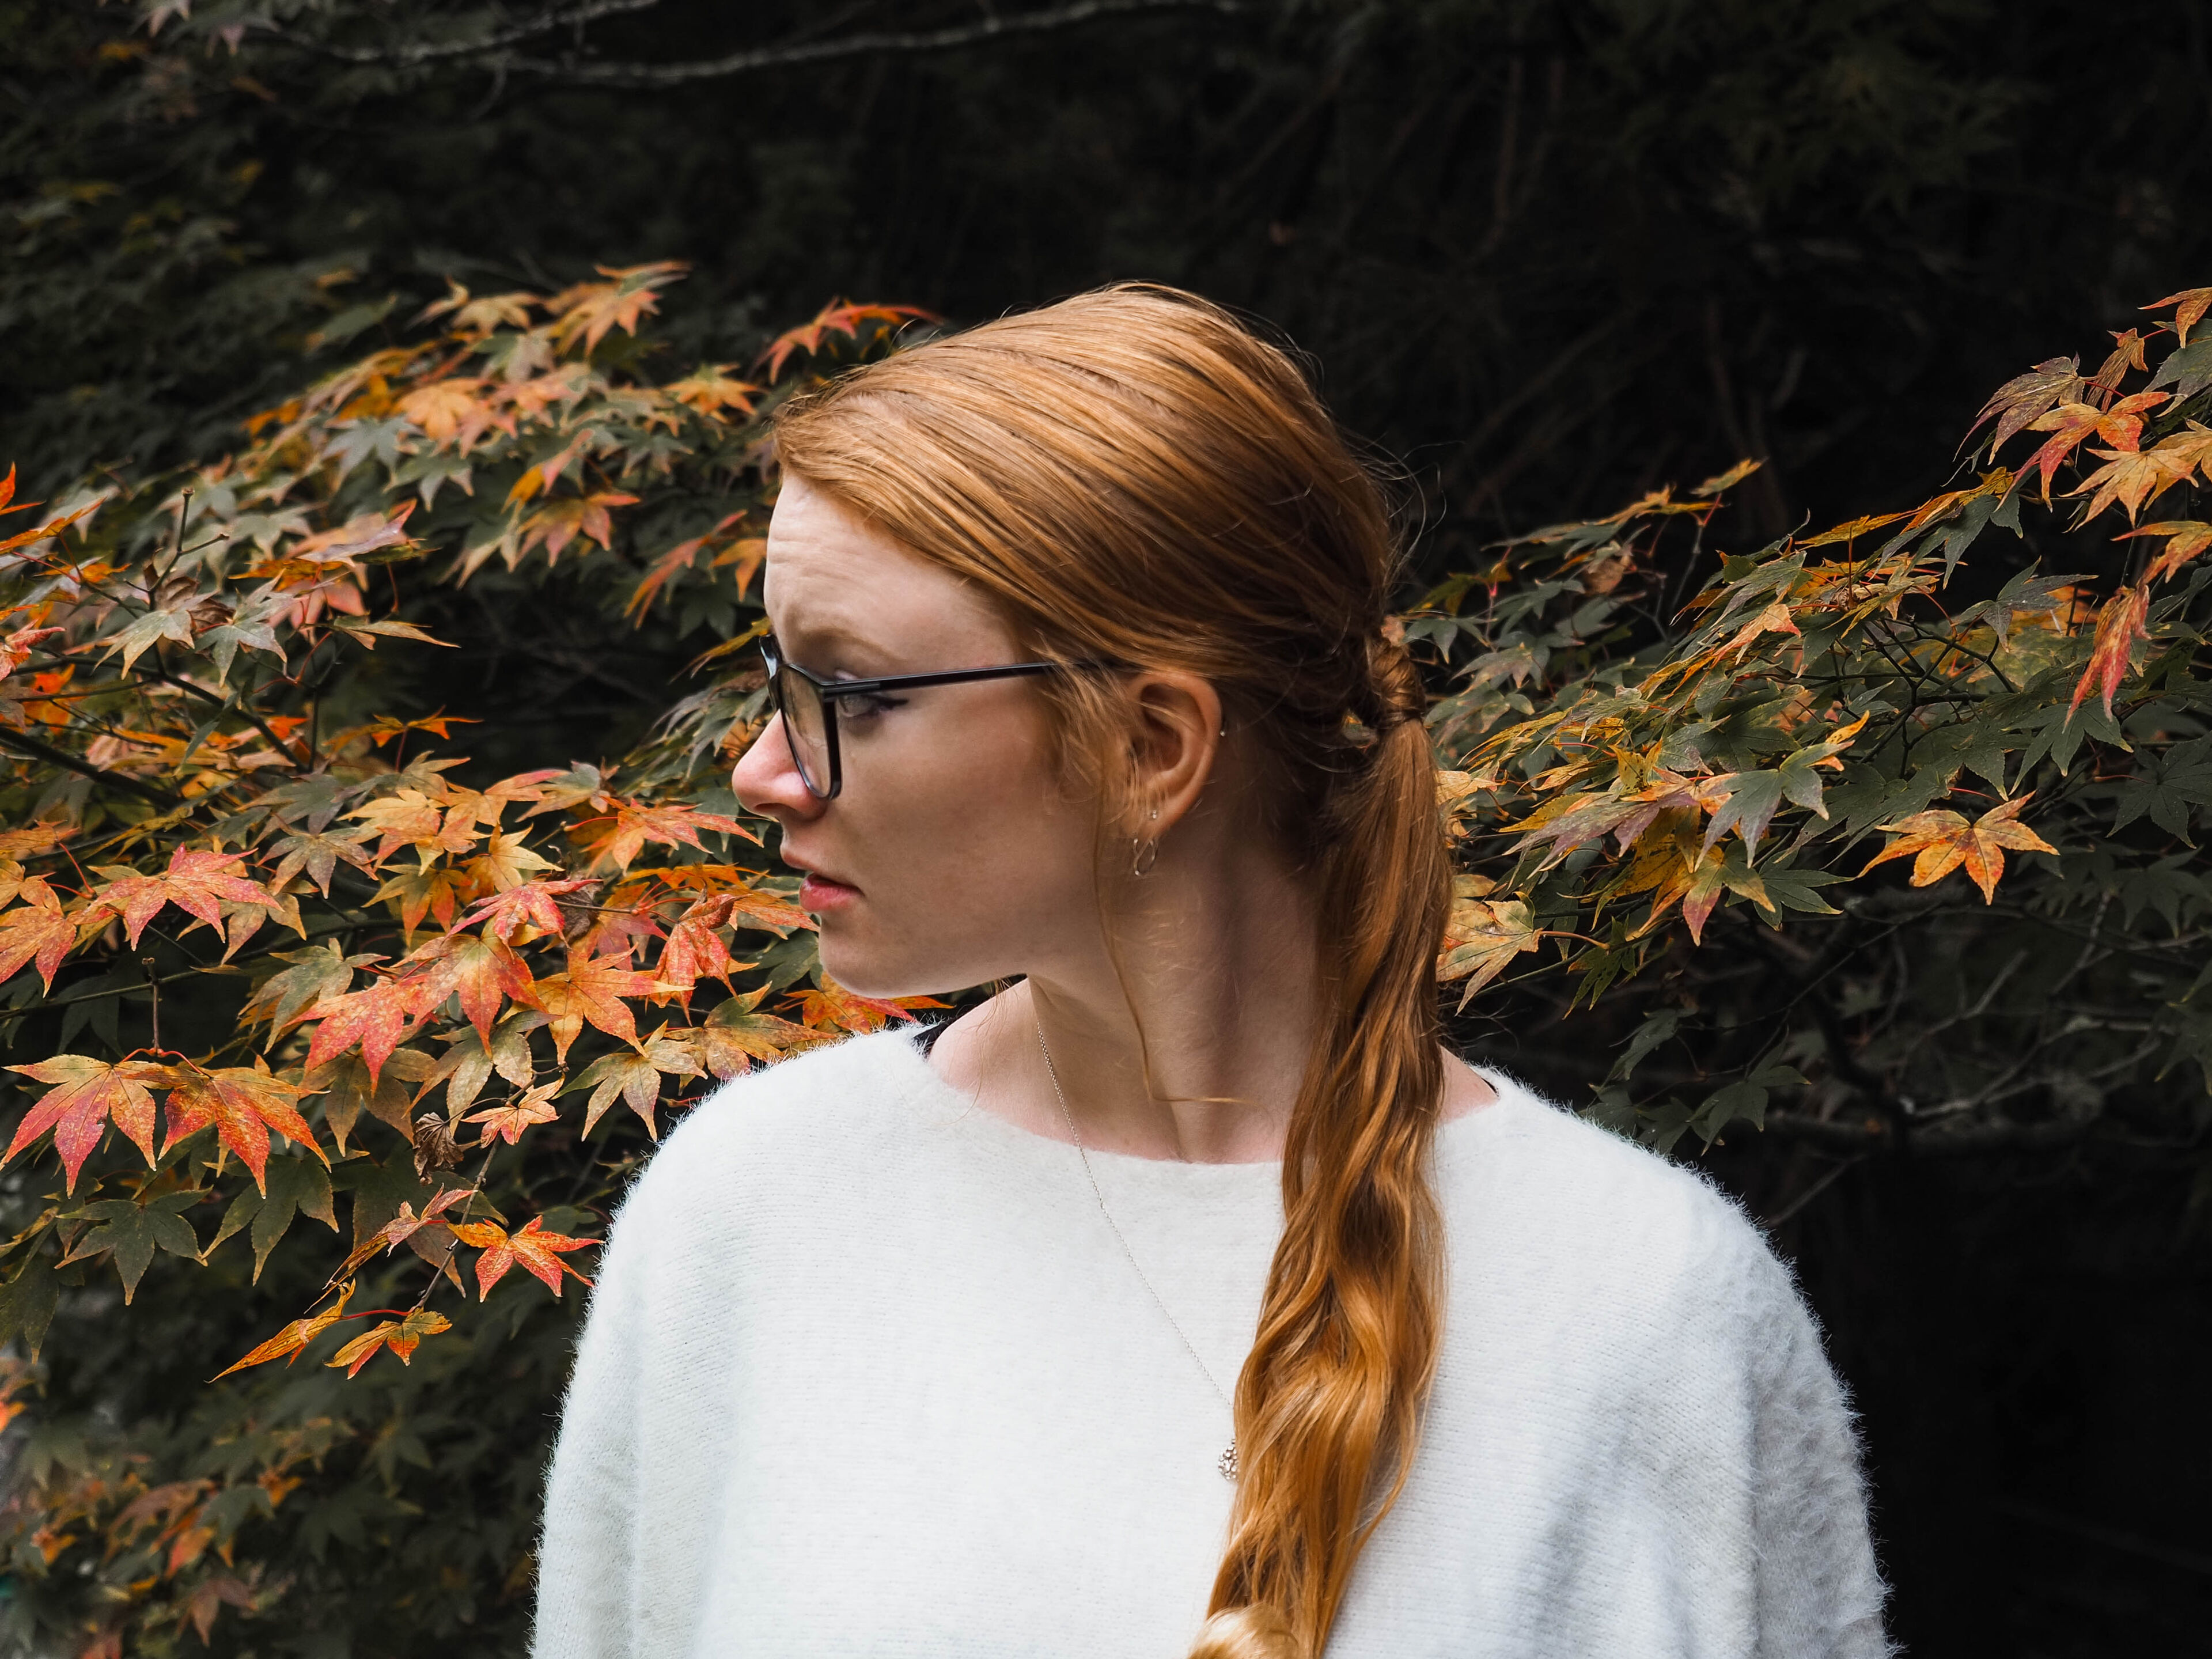 A red-haired woman in profile with glasses, wearing a white sweater, stands before a backdrop of autumn leaves.